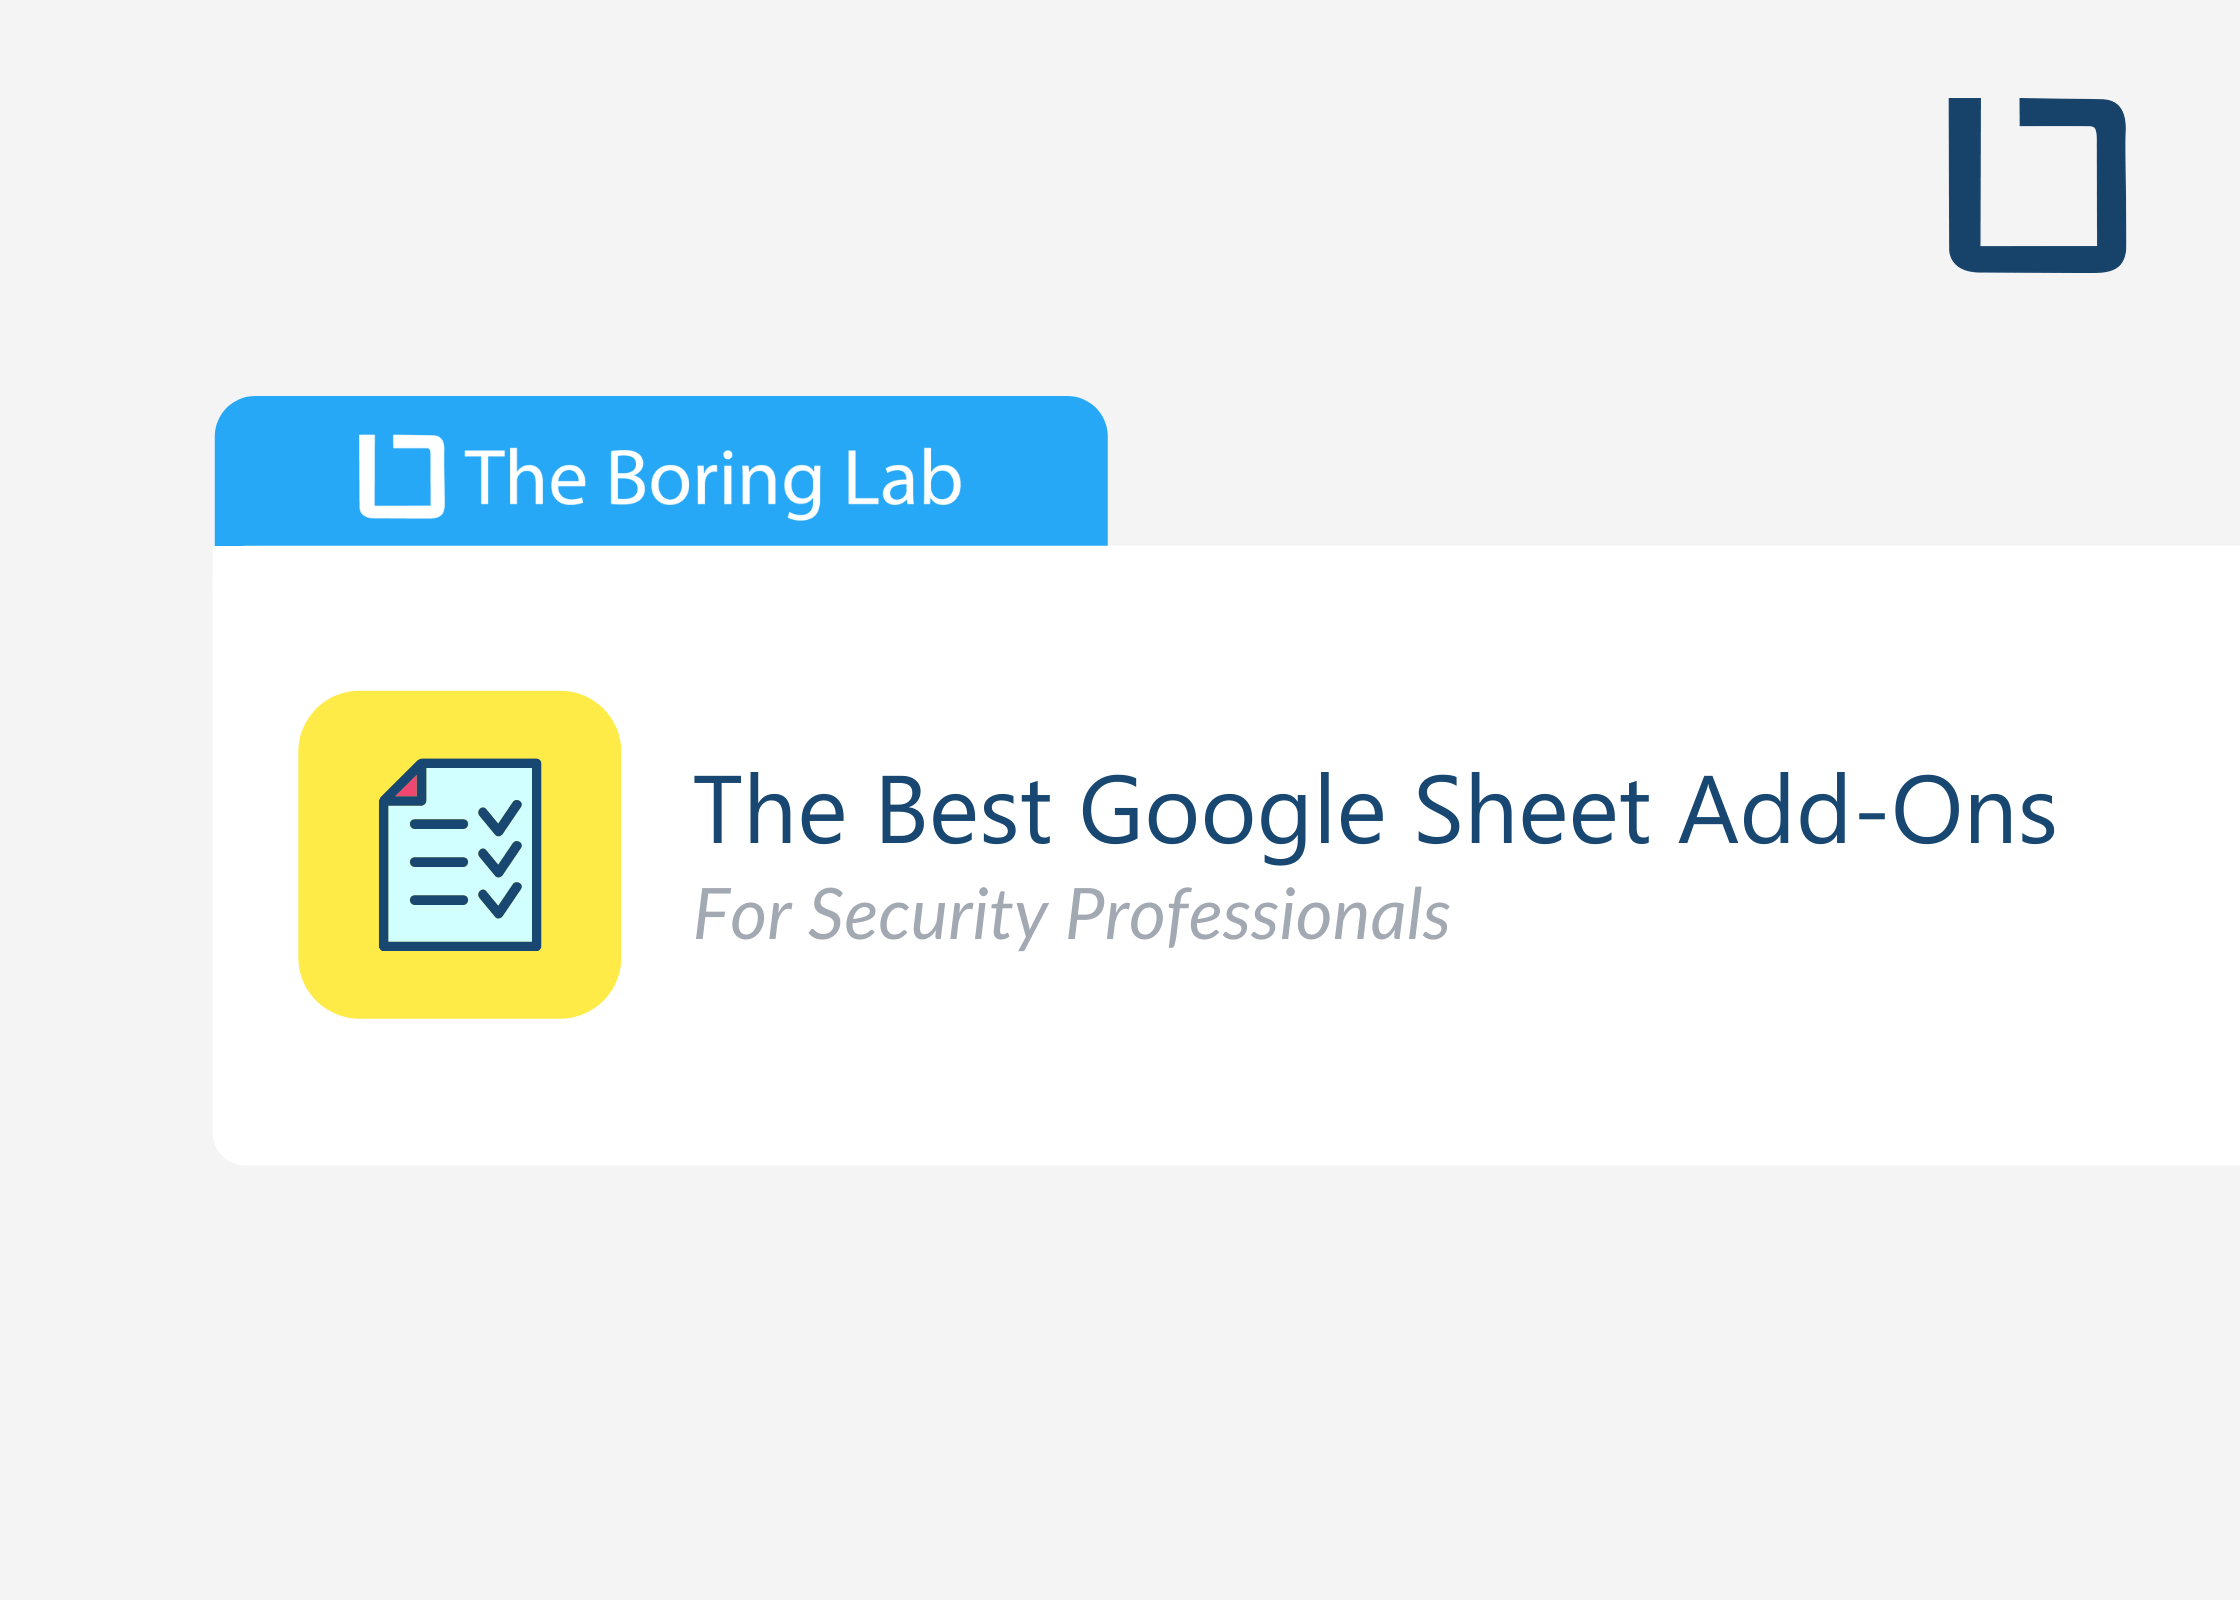 The 7 Best Google Sheet Add-Ons for Security Professionals